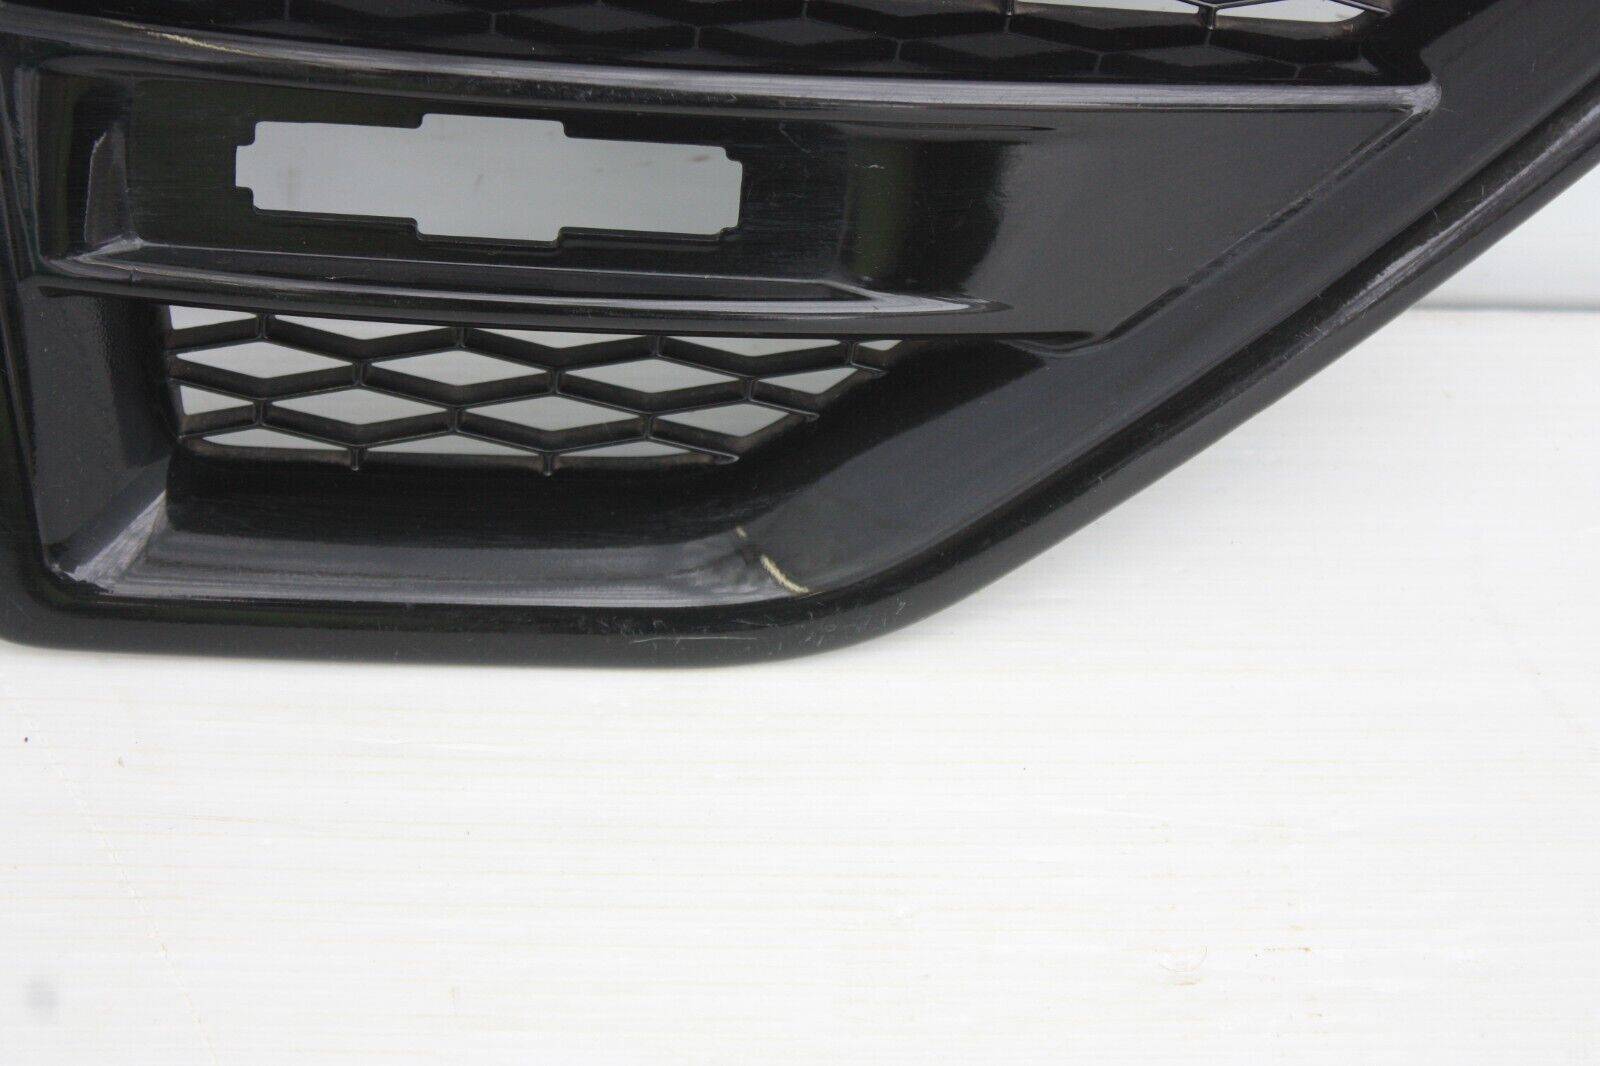 Land-Rover-Freelander-Front-Right-Side-Wing-Grill-2007-to-2015-6H52-014K80-BB-176267107753-4